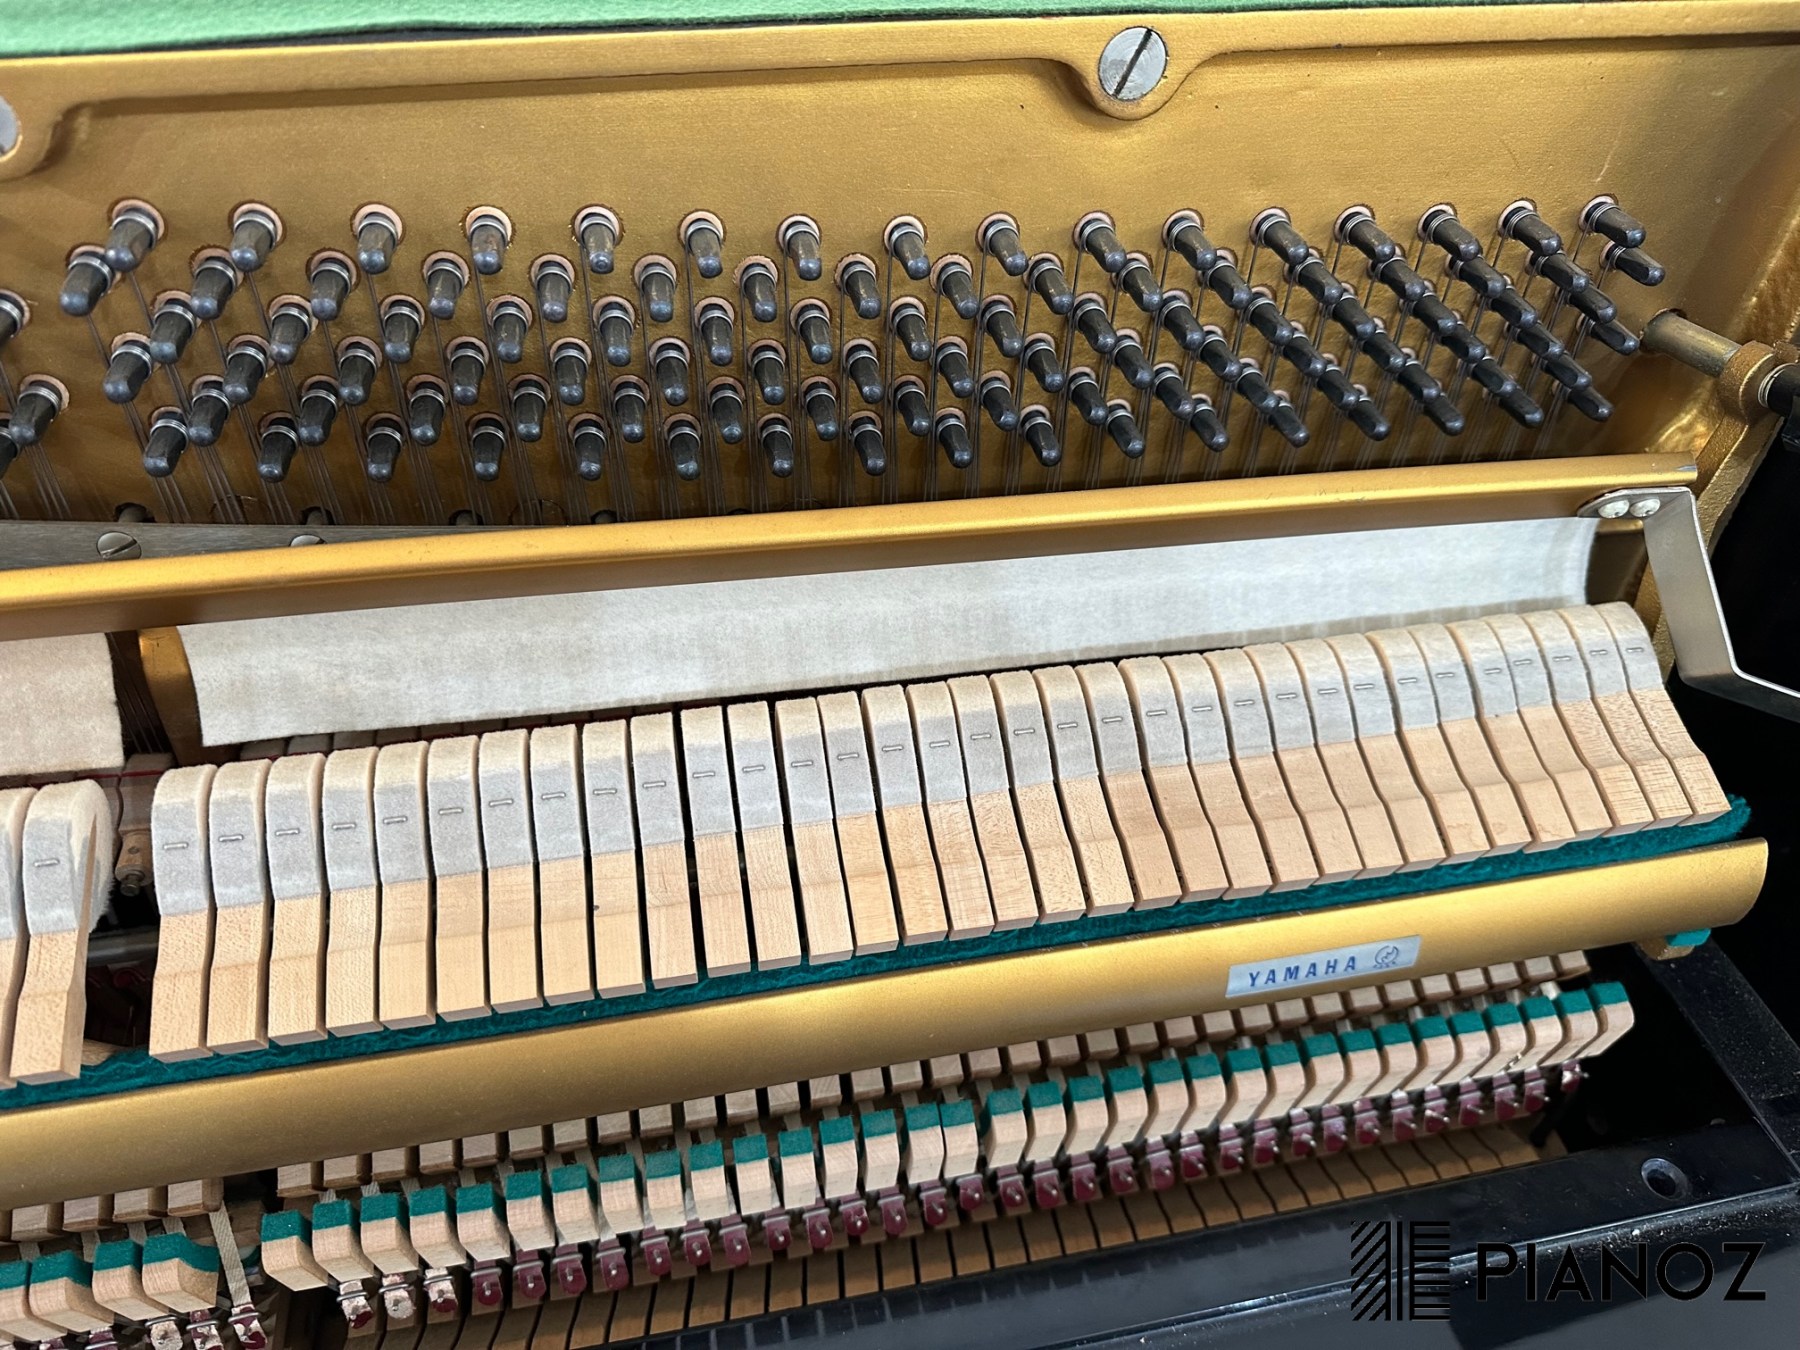 Yamaha Japanese Upright Piano piano for sale in UK